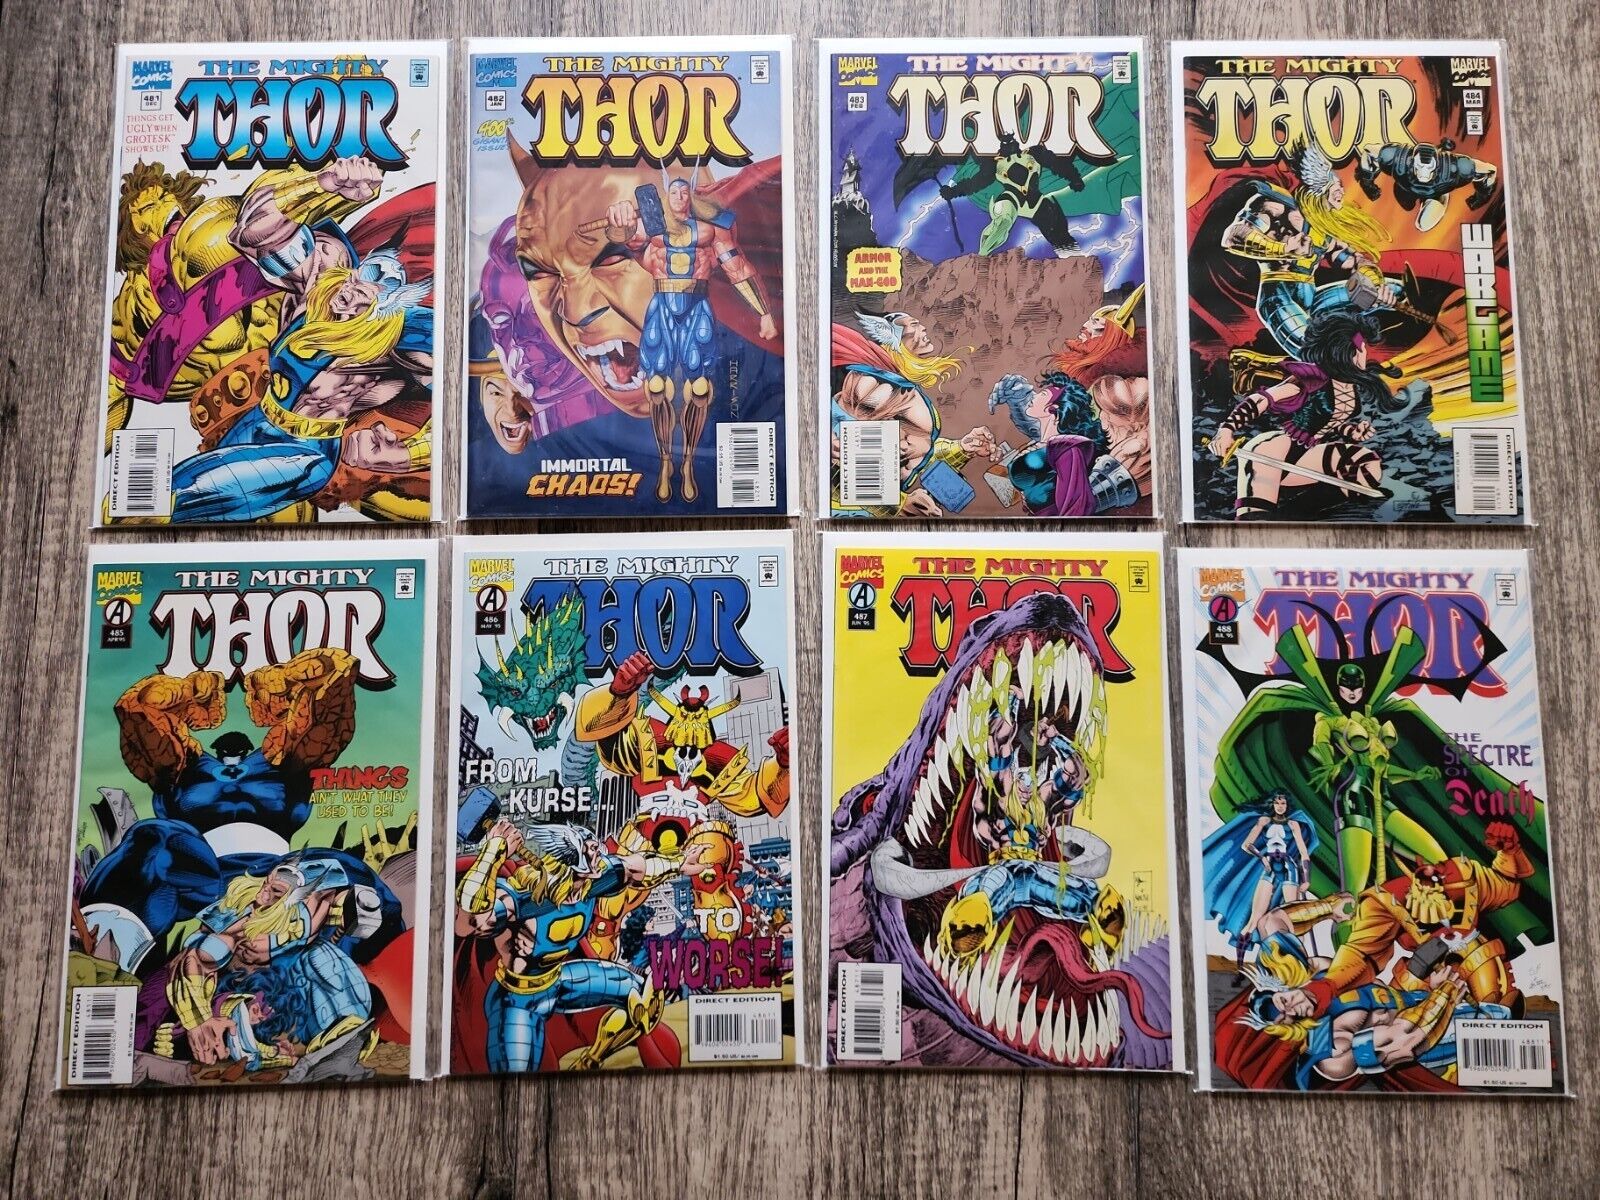 THE MIGHTY THOR 1990\'s Vintage Comic Lot Marvel Comics 8 Books #481-488 Boarded